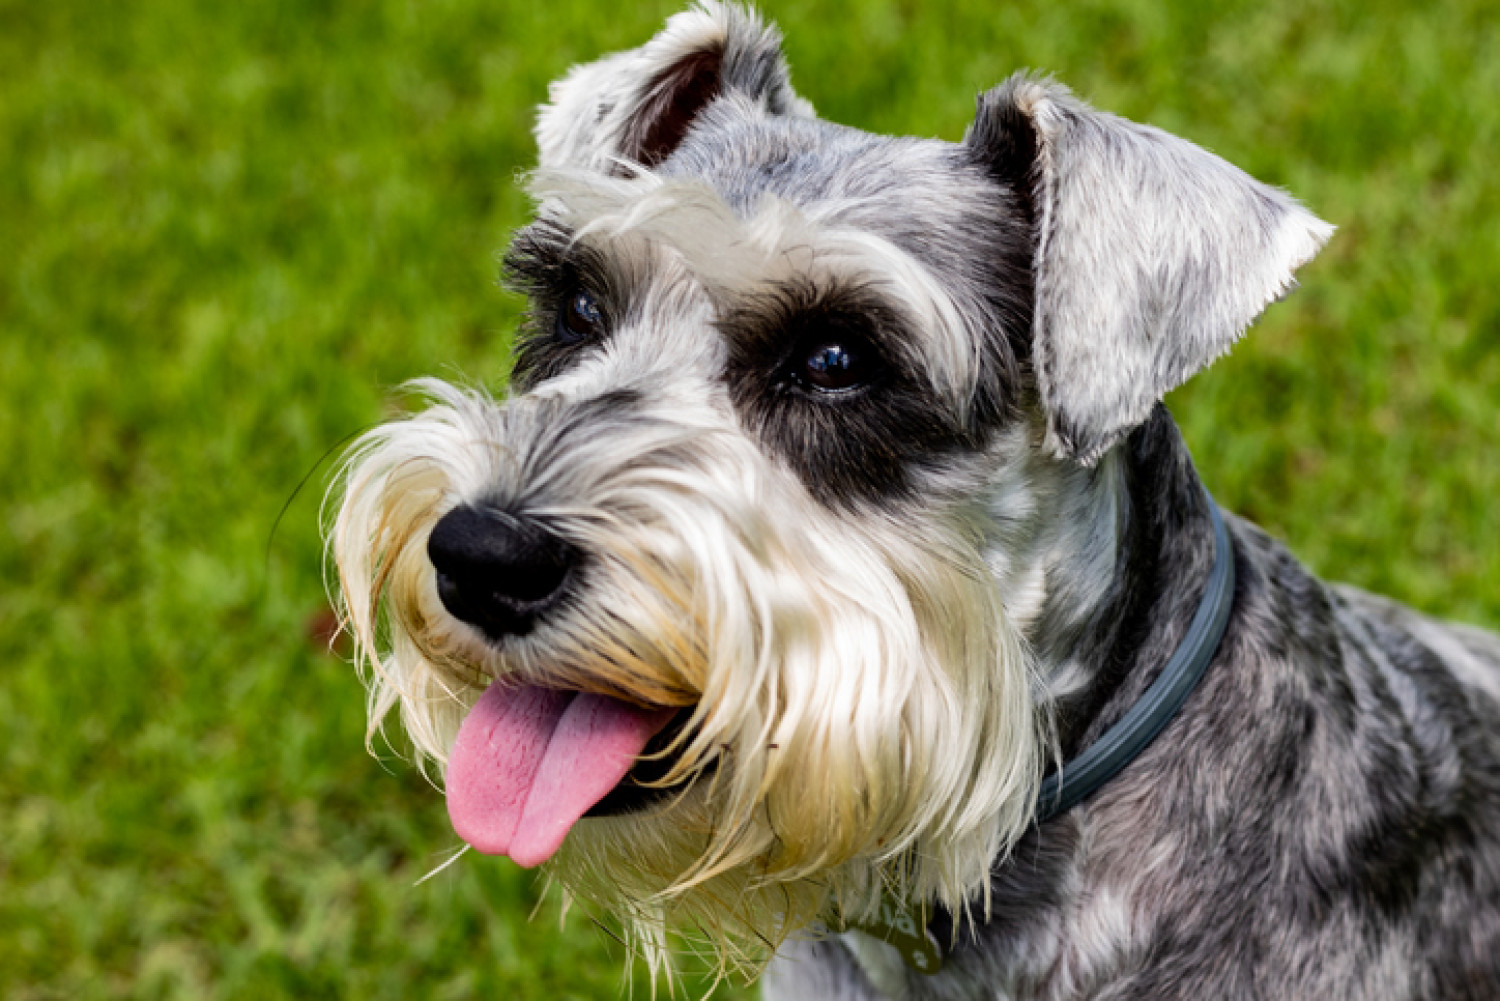 An attentive Schnauzer sits outdoors with its tongue out, exemplifying the breed's friendly nature and suitability as a therapy dog for those with dementia.